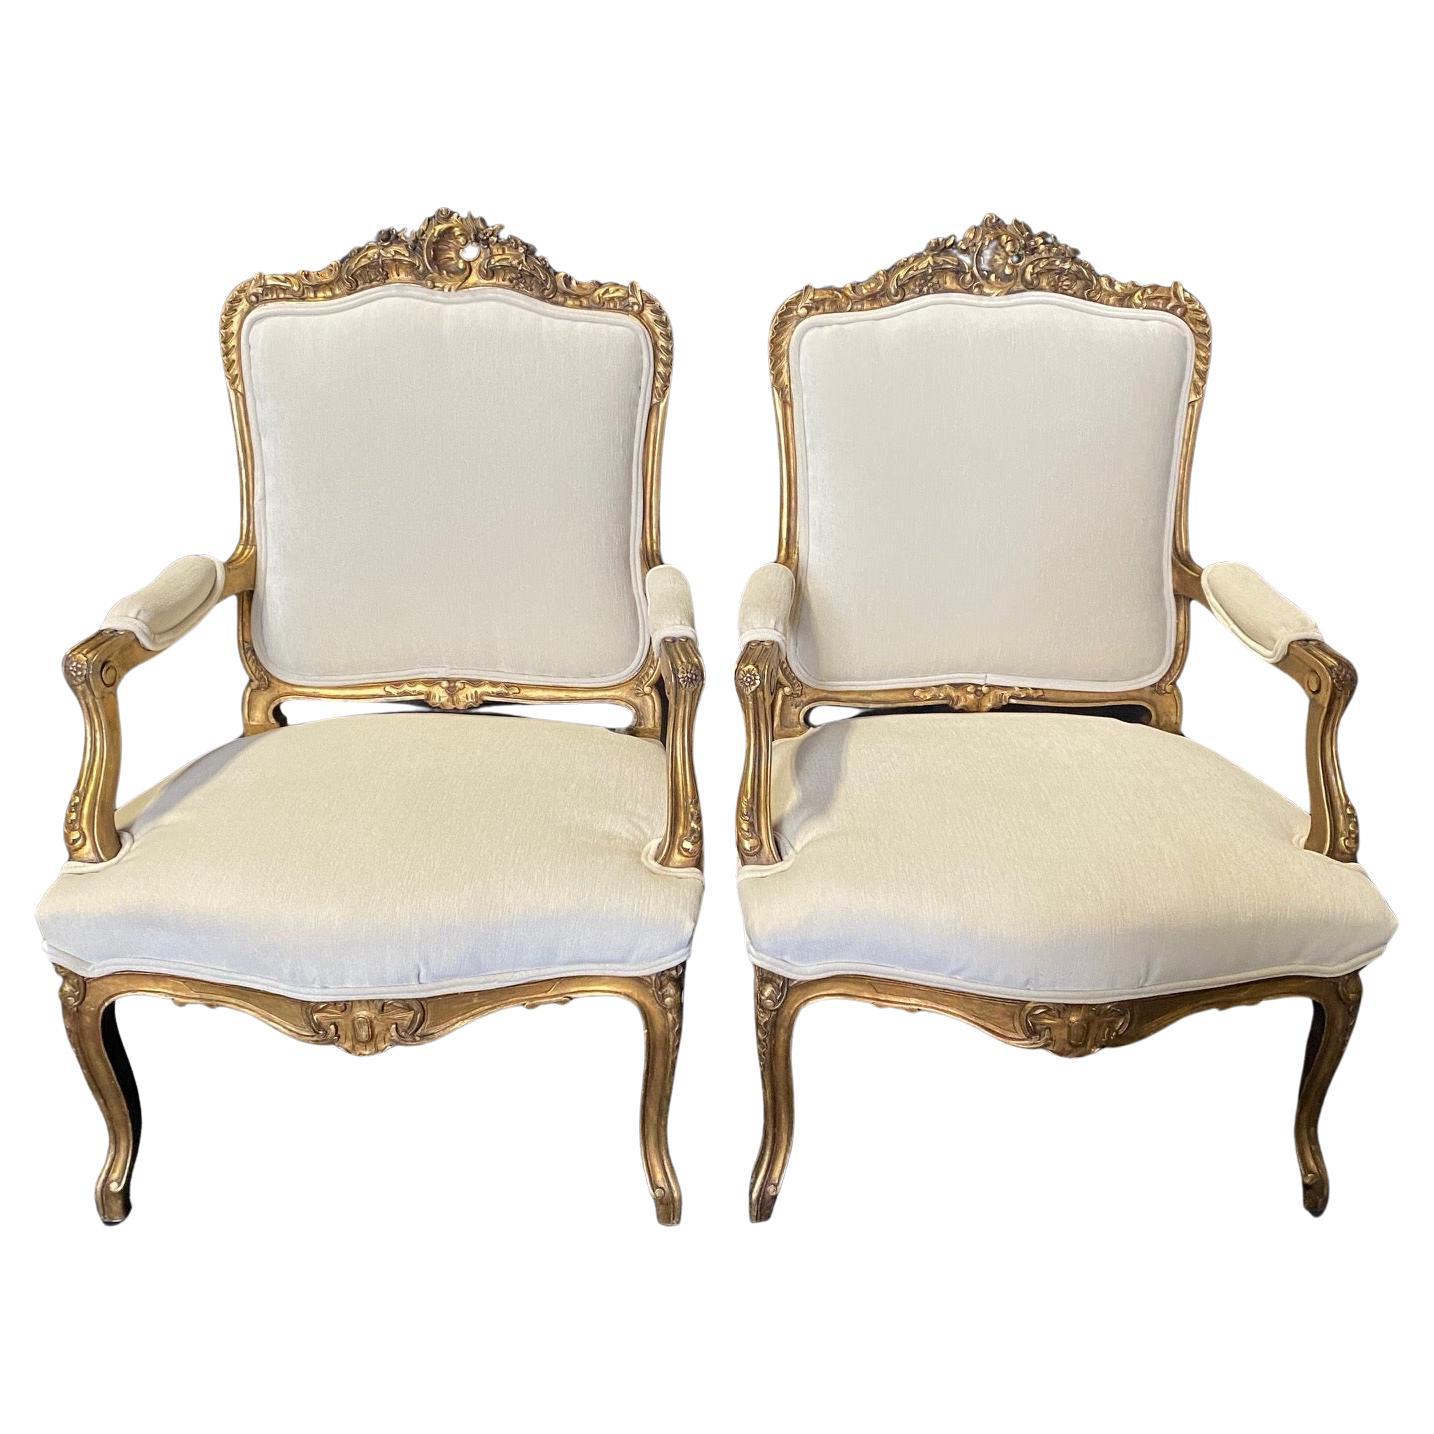  Pair of Antique French Louis XV Fauteuil Gilded Arm Chairs  For Sale